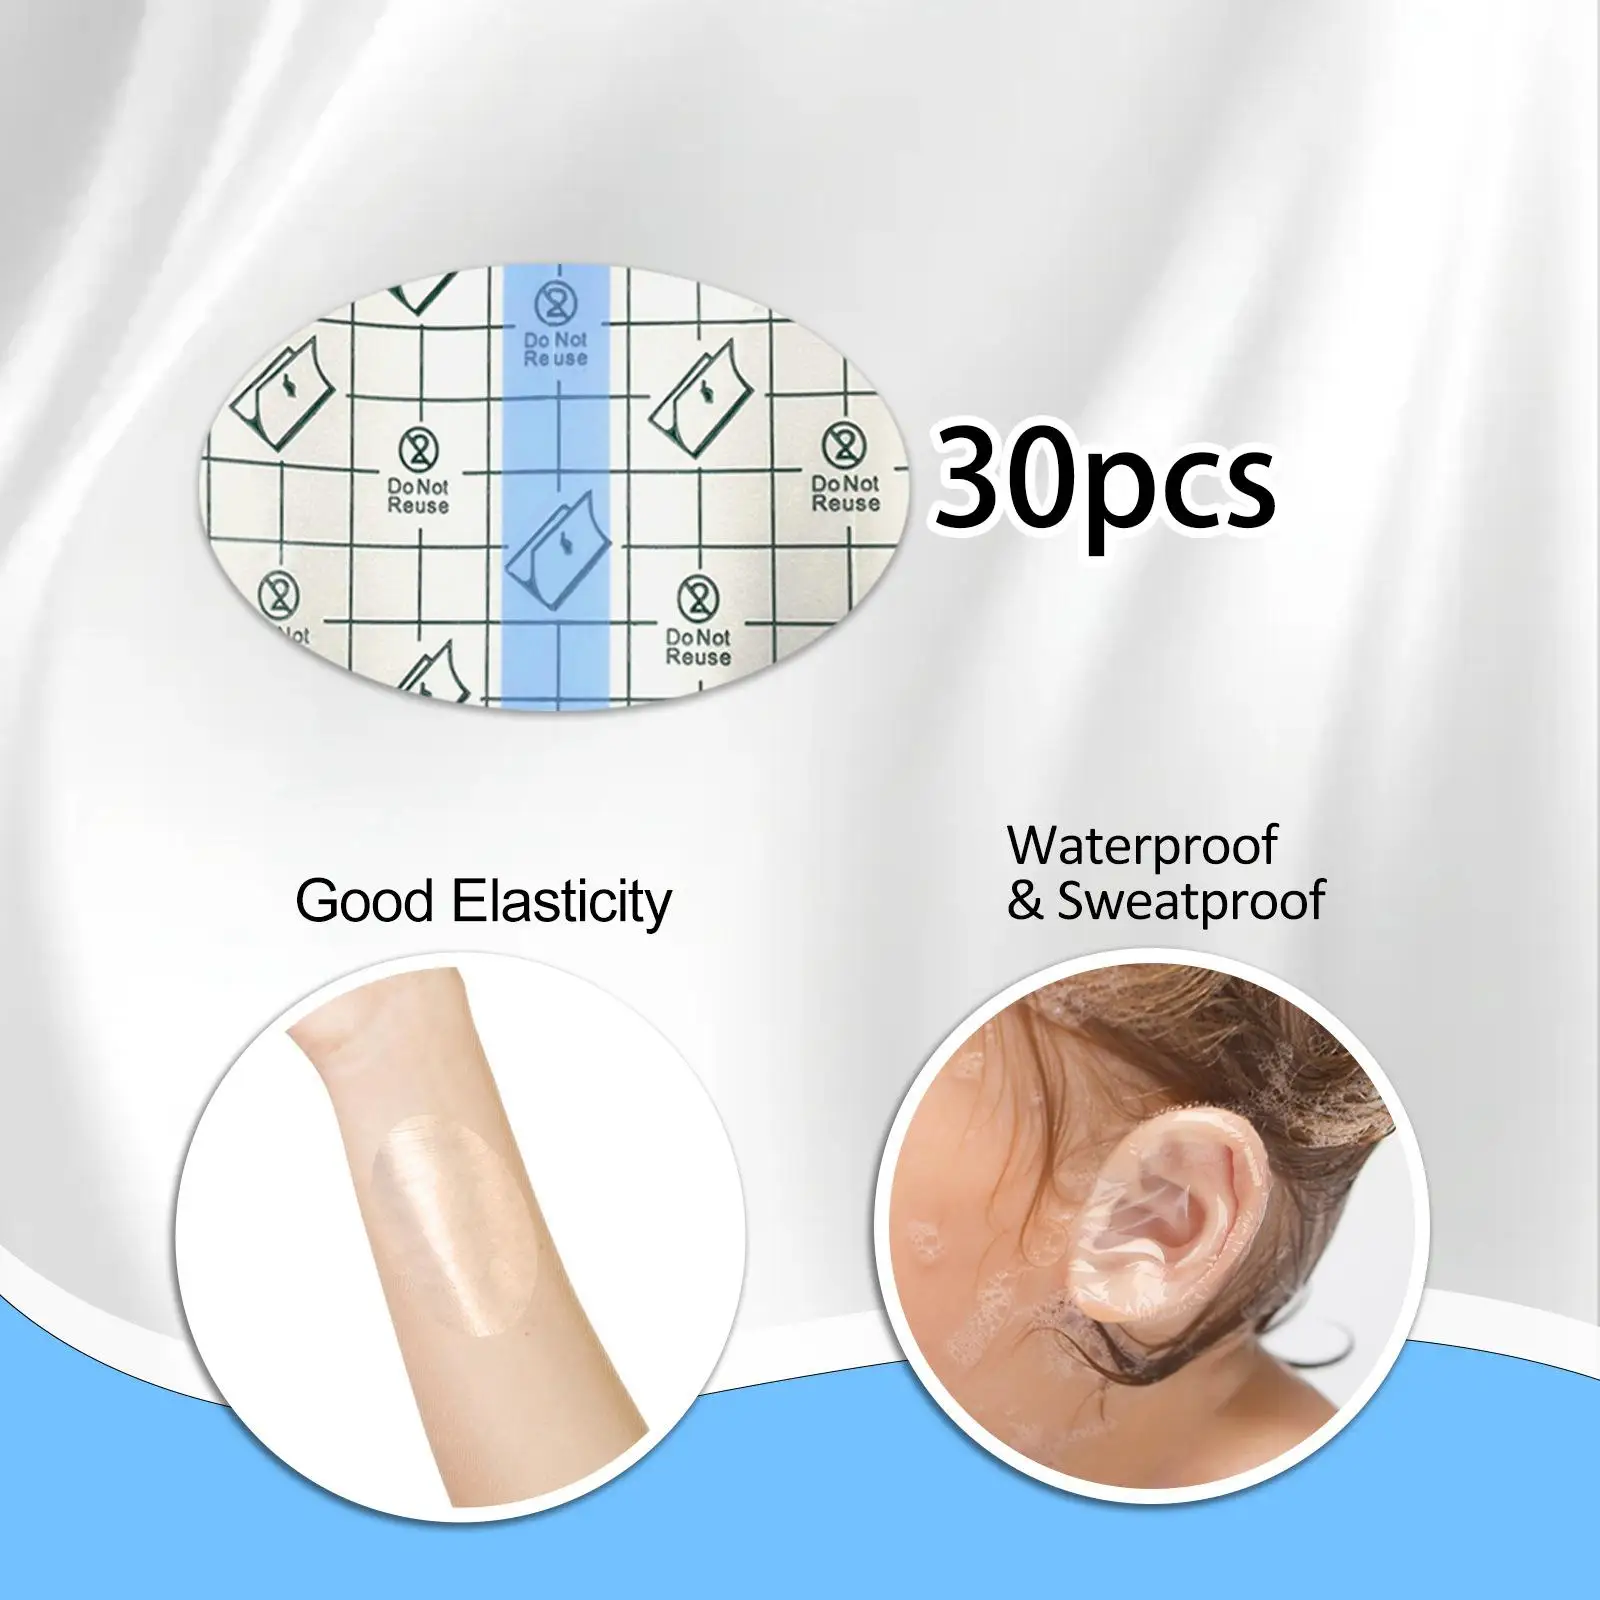 30 Pieces Baby Waterproof Ear Stickers Easy Carry Made of Soft Breathable PU Film Ear Protection for Shower Bathing Swiming